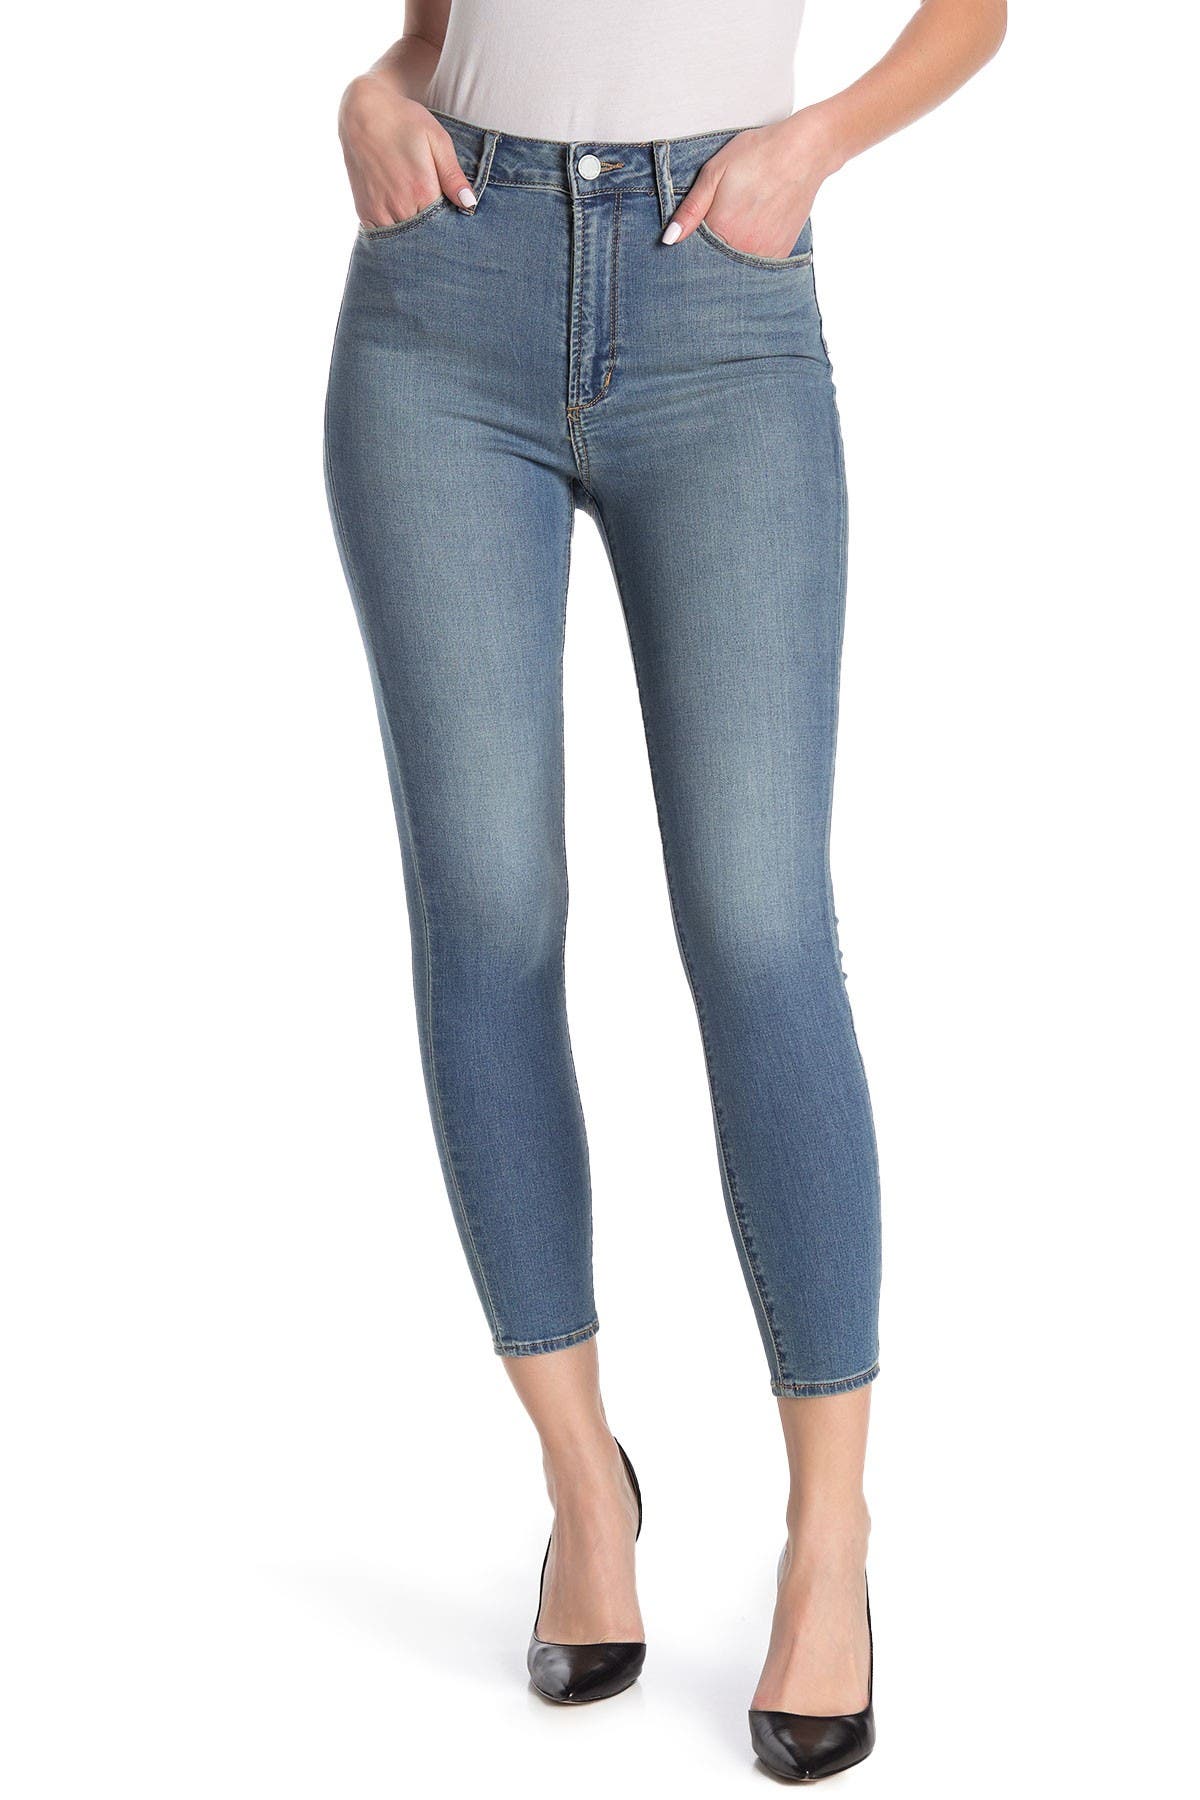 nordstrom rack articles of society jeans